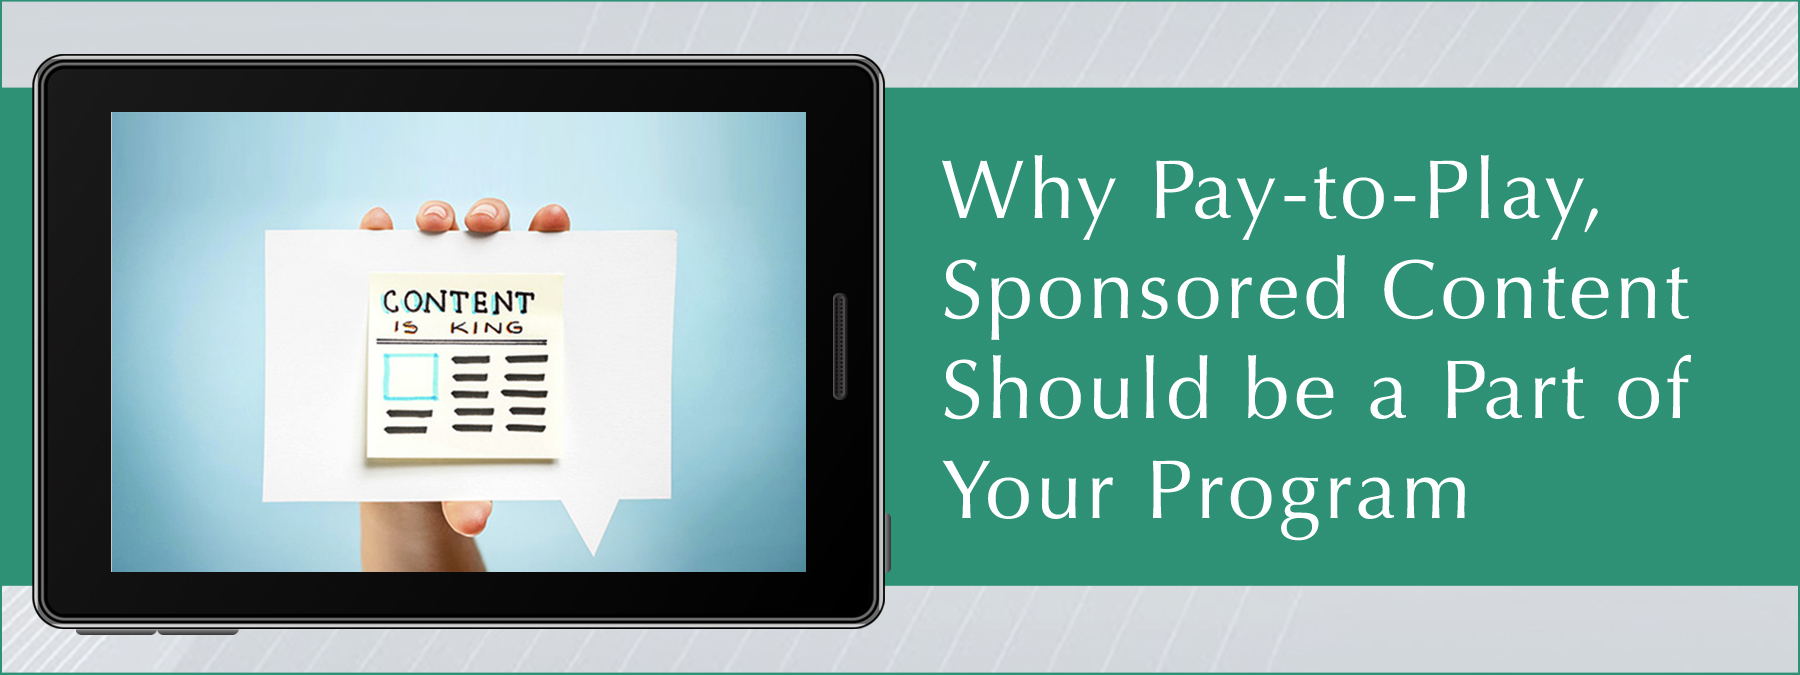 Why Pay-to-Play, Sponsored Content Should be a Part of Your Program